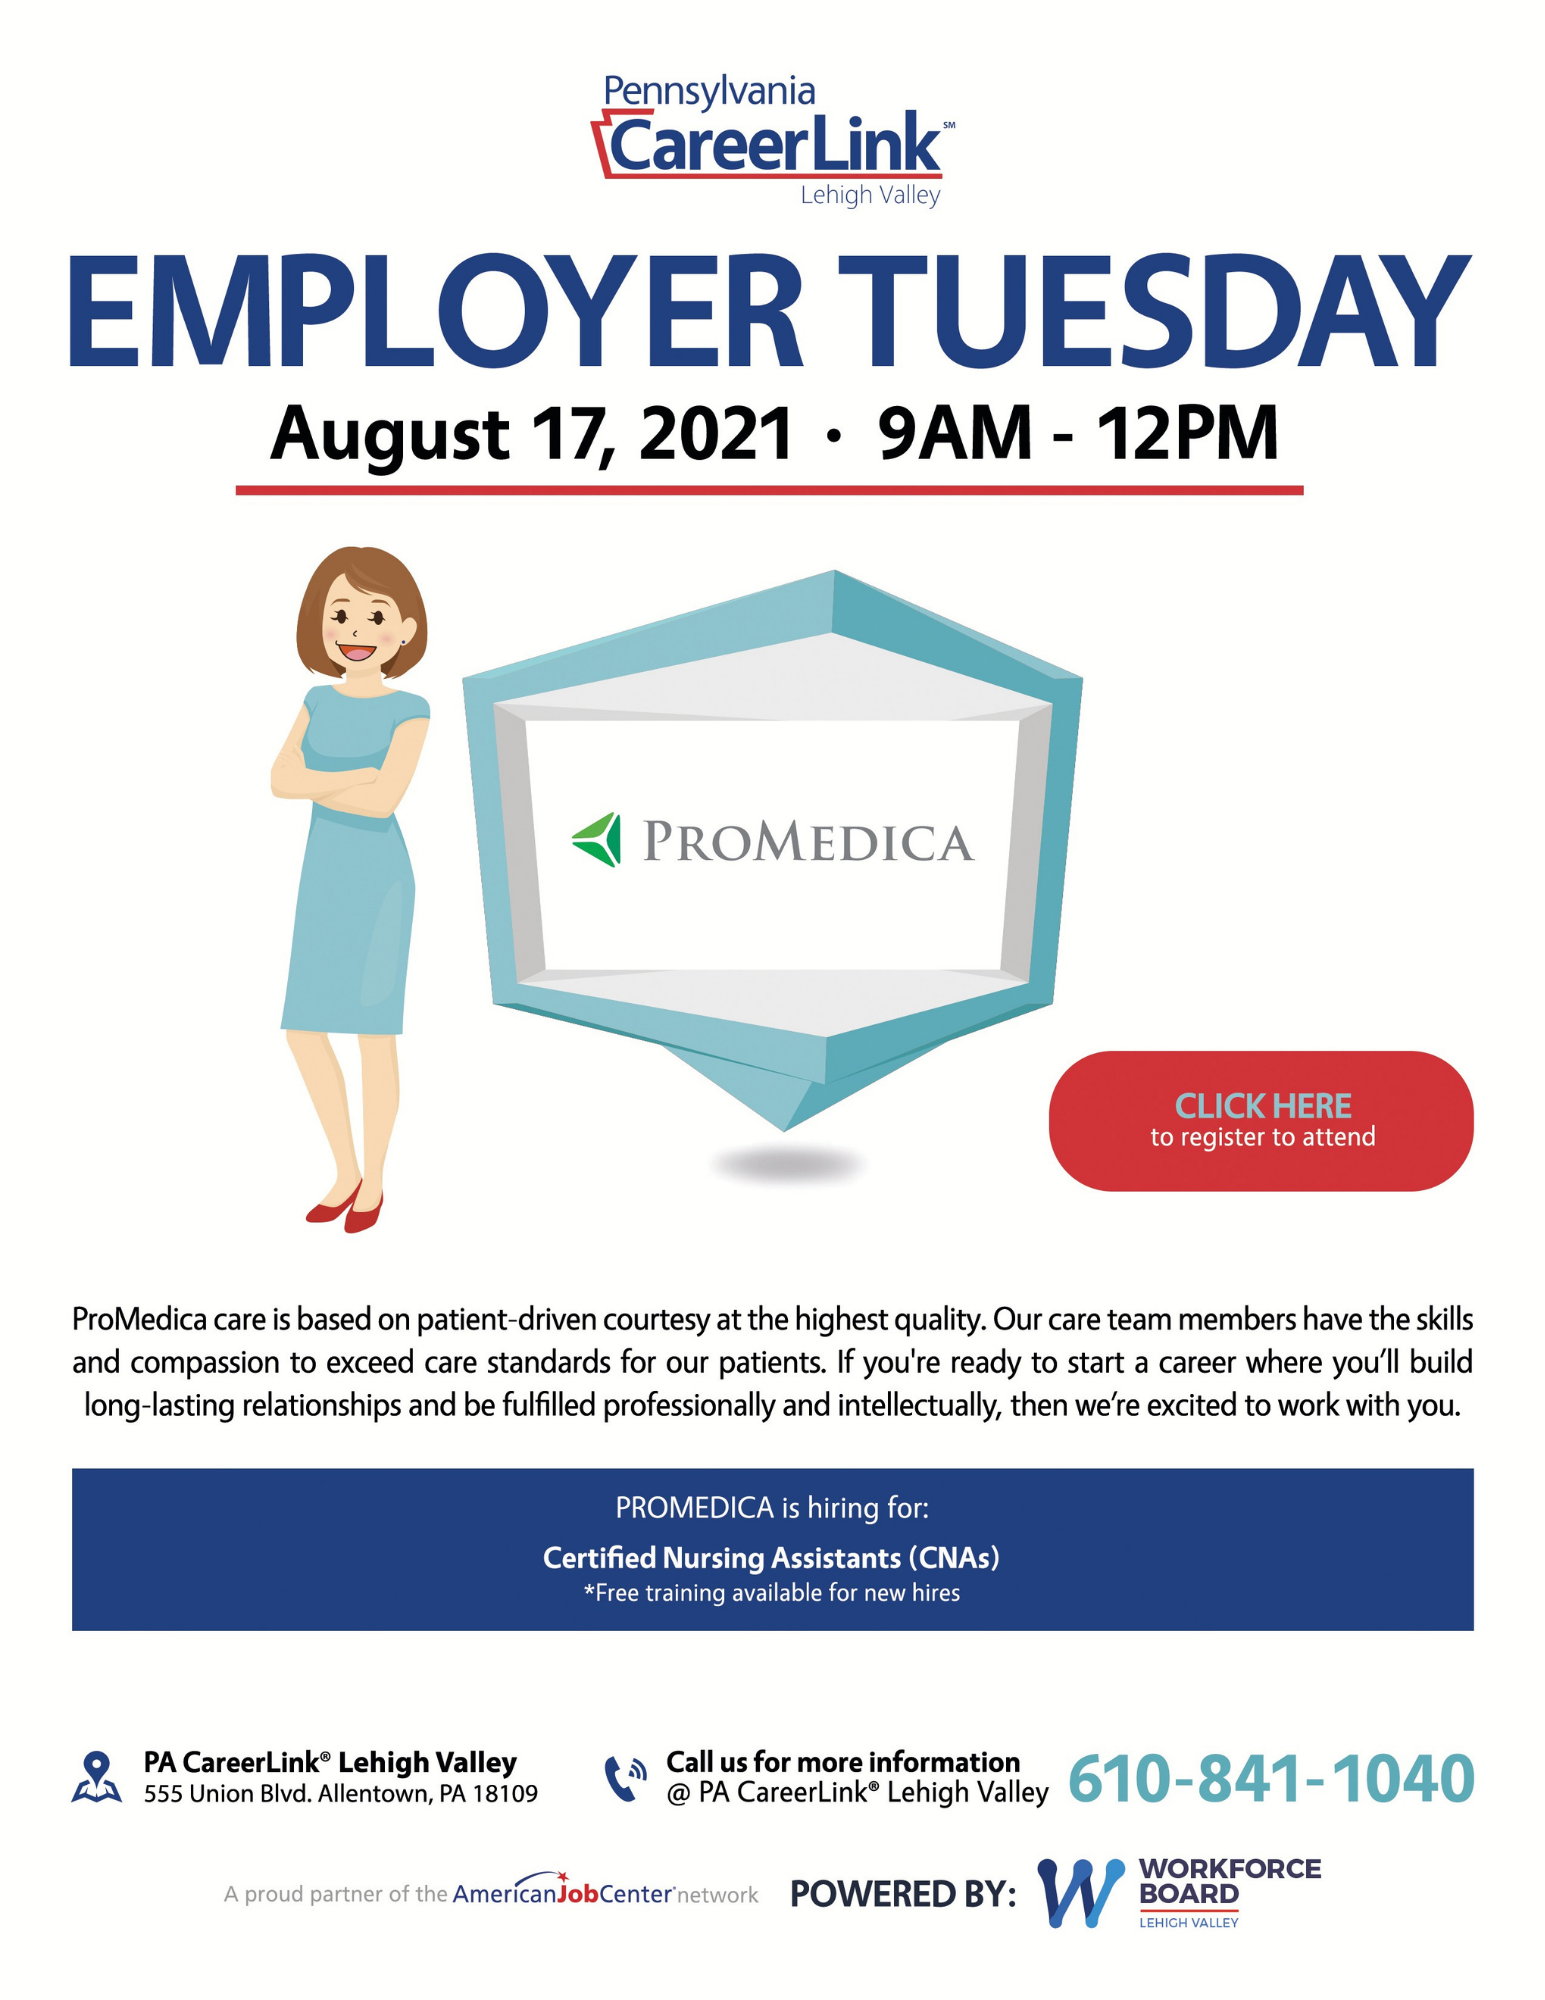 Employer Tuesday Promedica event flyer